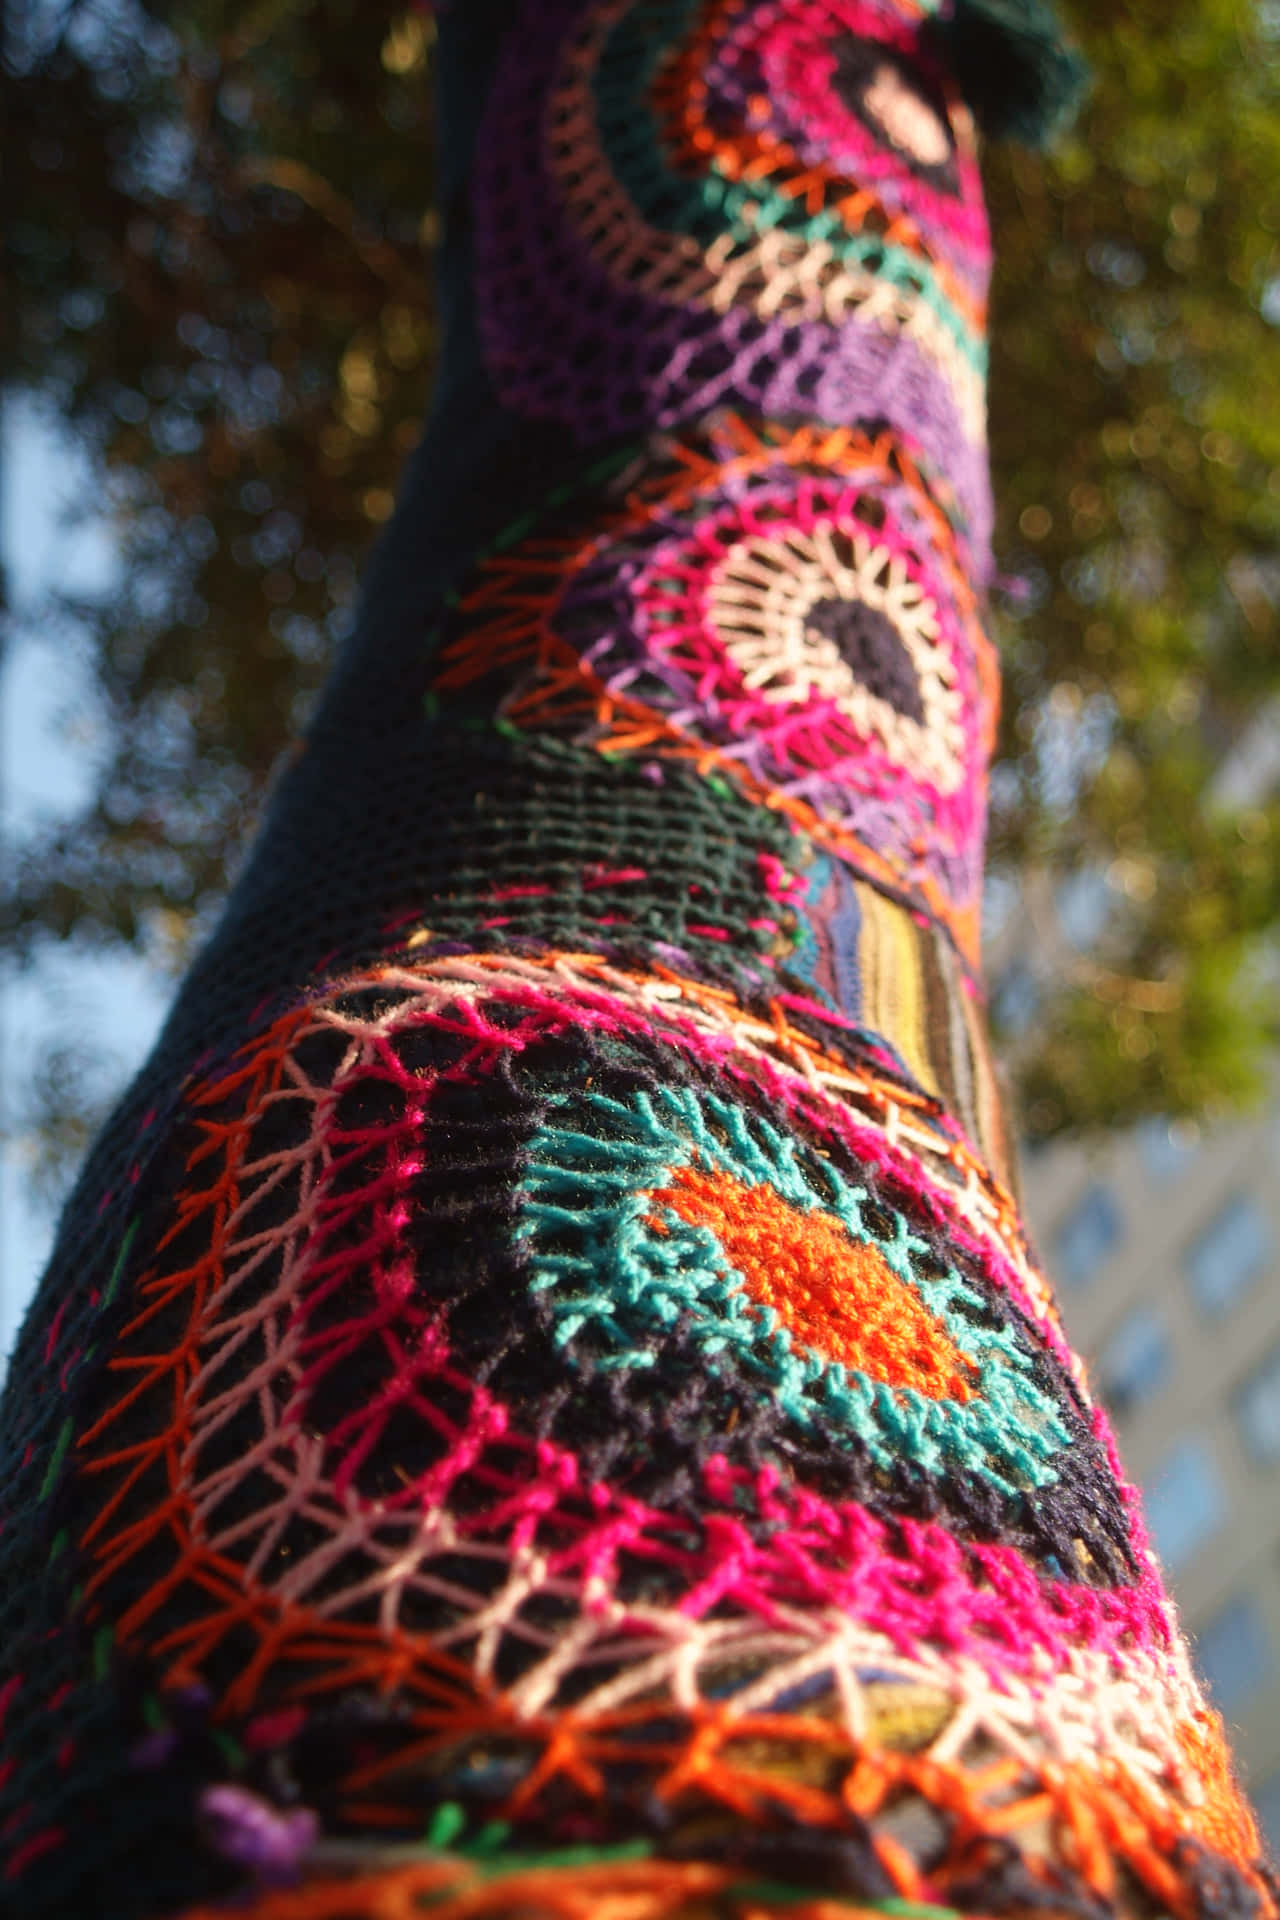 Colorful Crocheted Tree Trunk Using Knitting Yarns Wallpaper